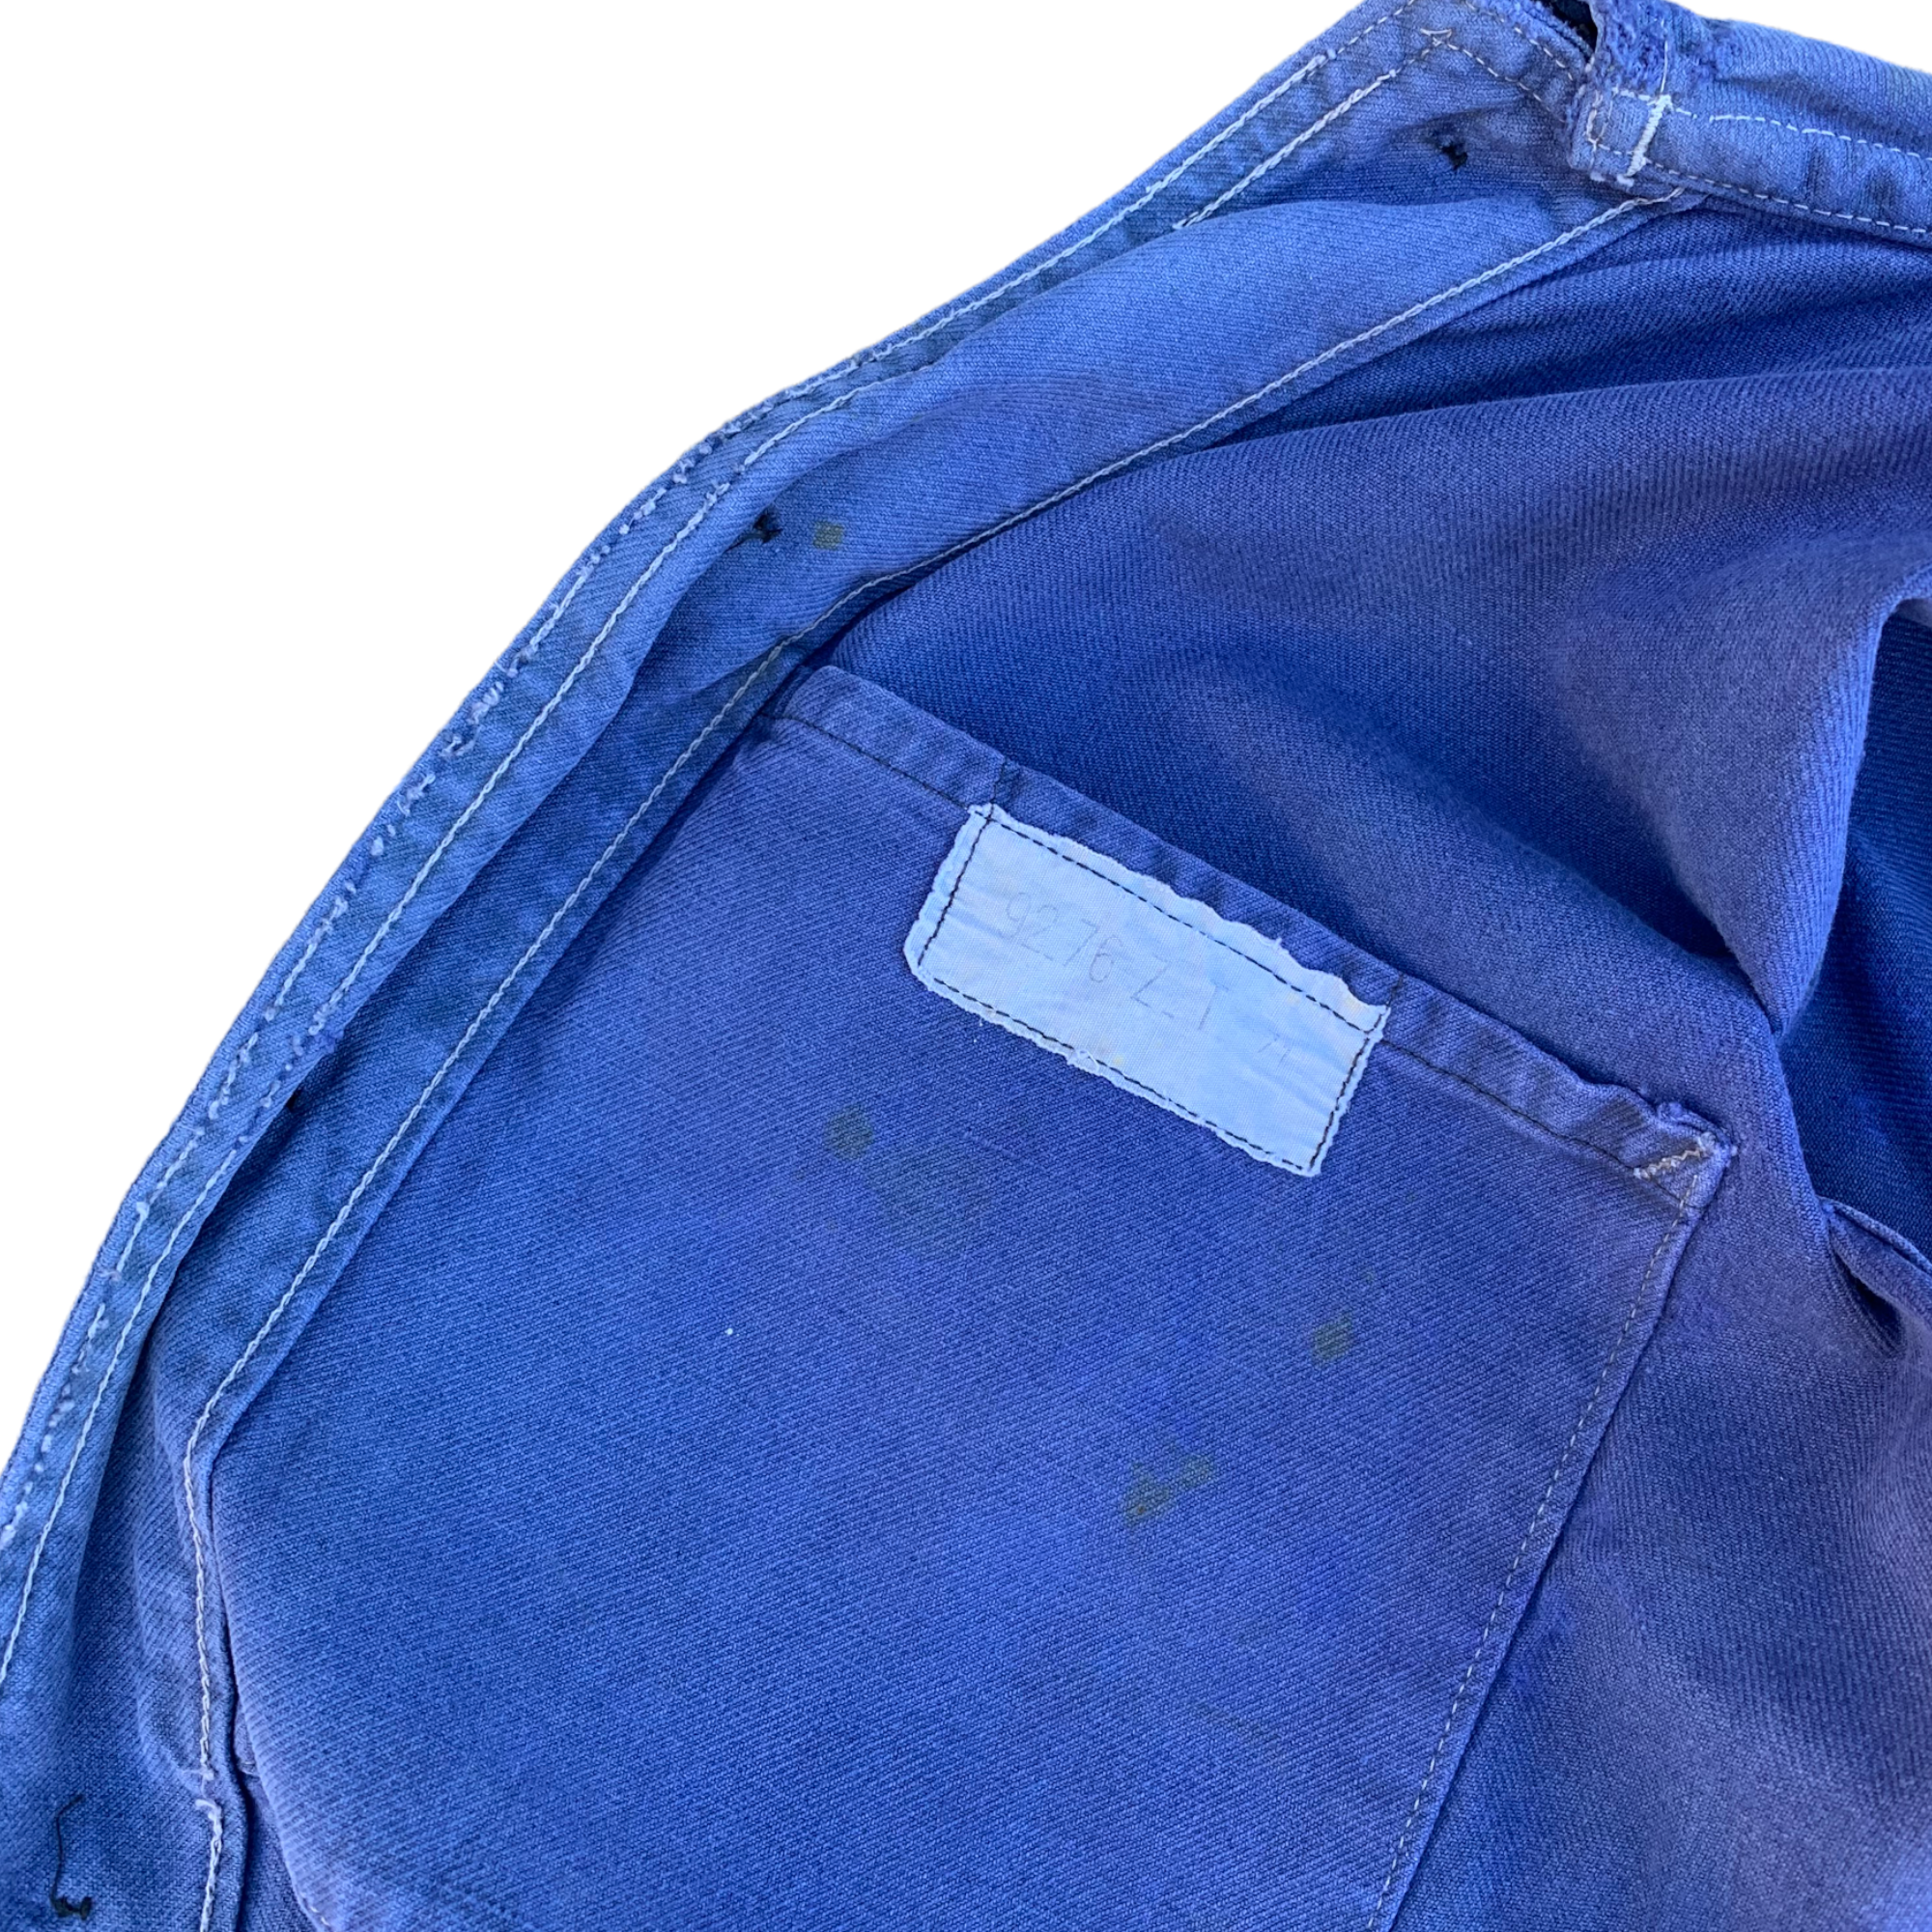 1950s Distressed French Moleskin Work Jacket w/ Contrast Stitching - Faded Blue - L